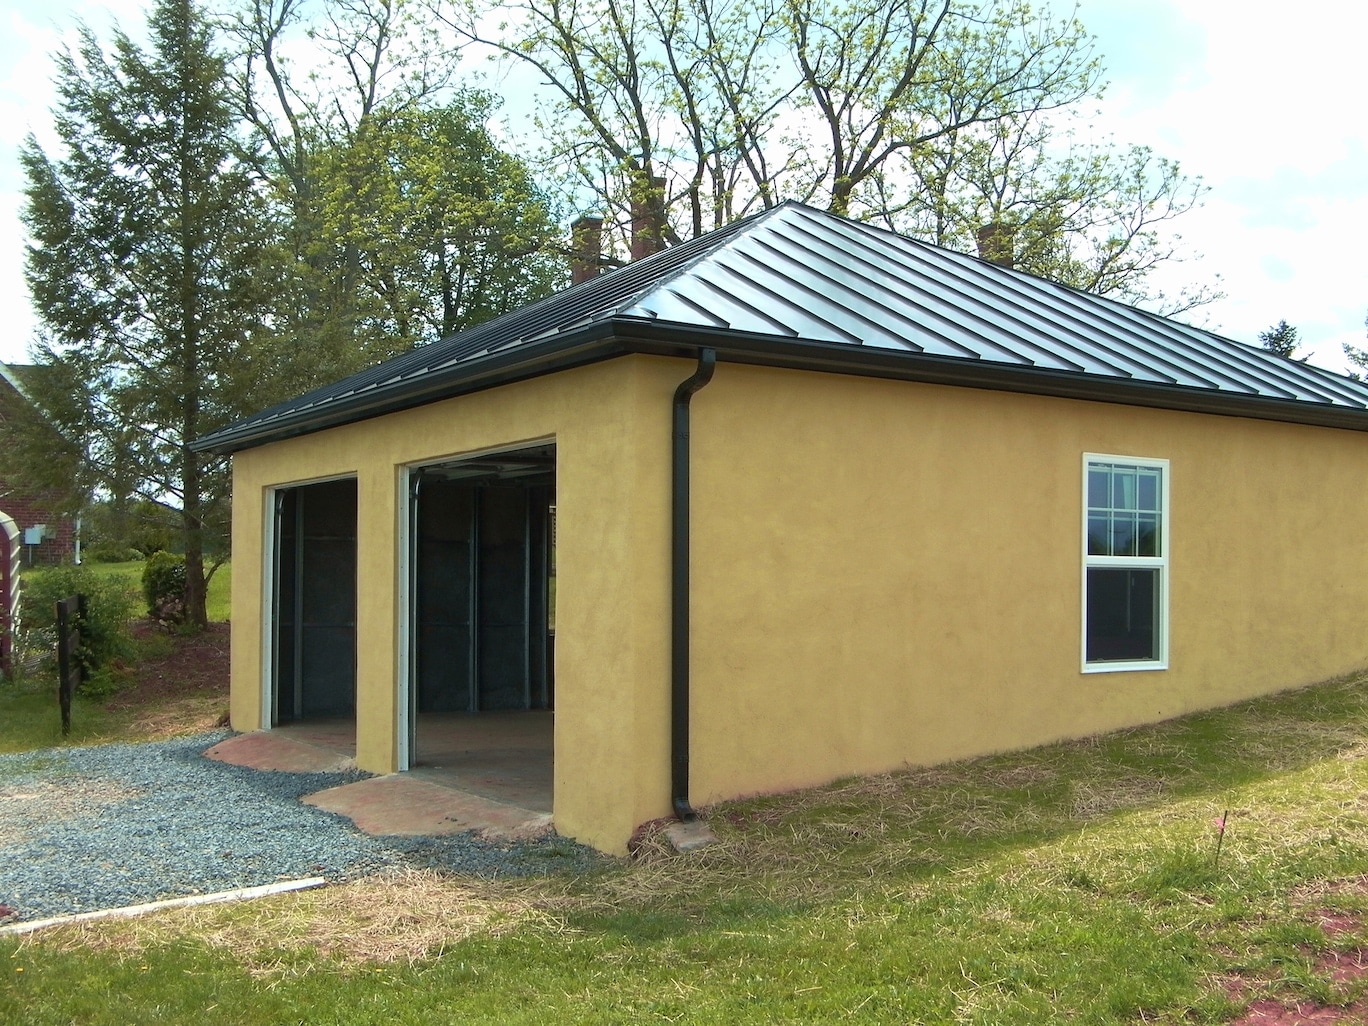 Prefab Ferrocement Kit for a tiny-house size garage